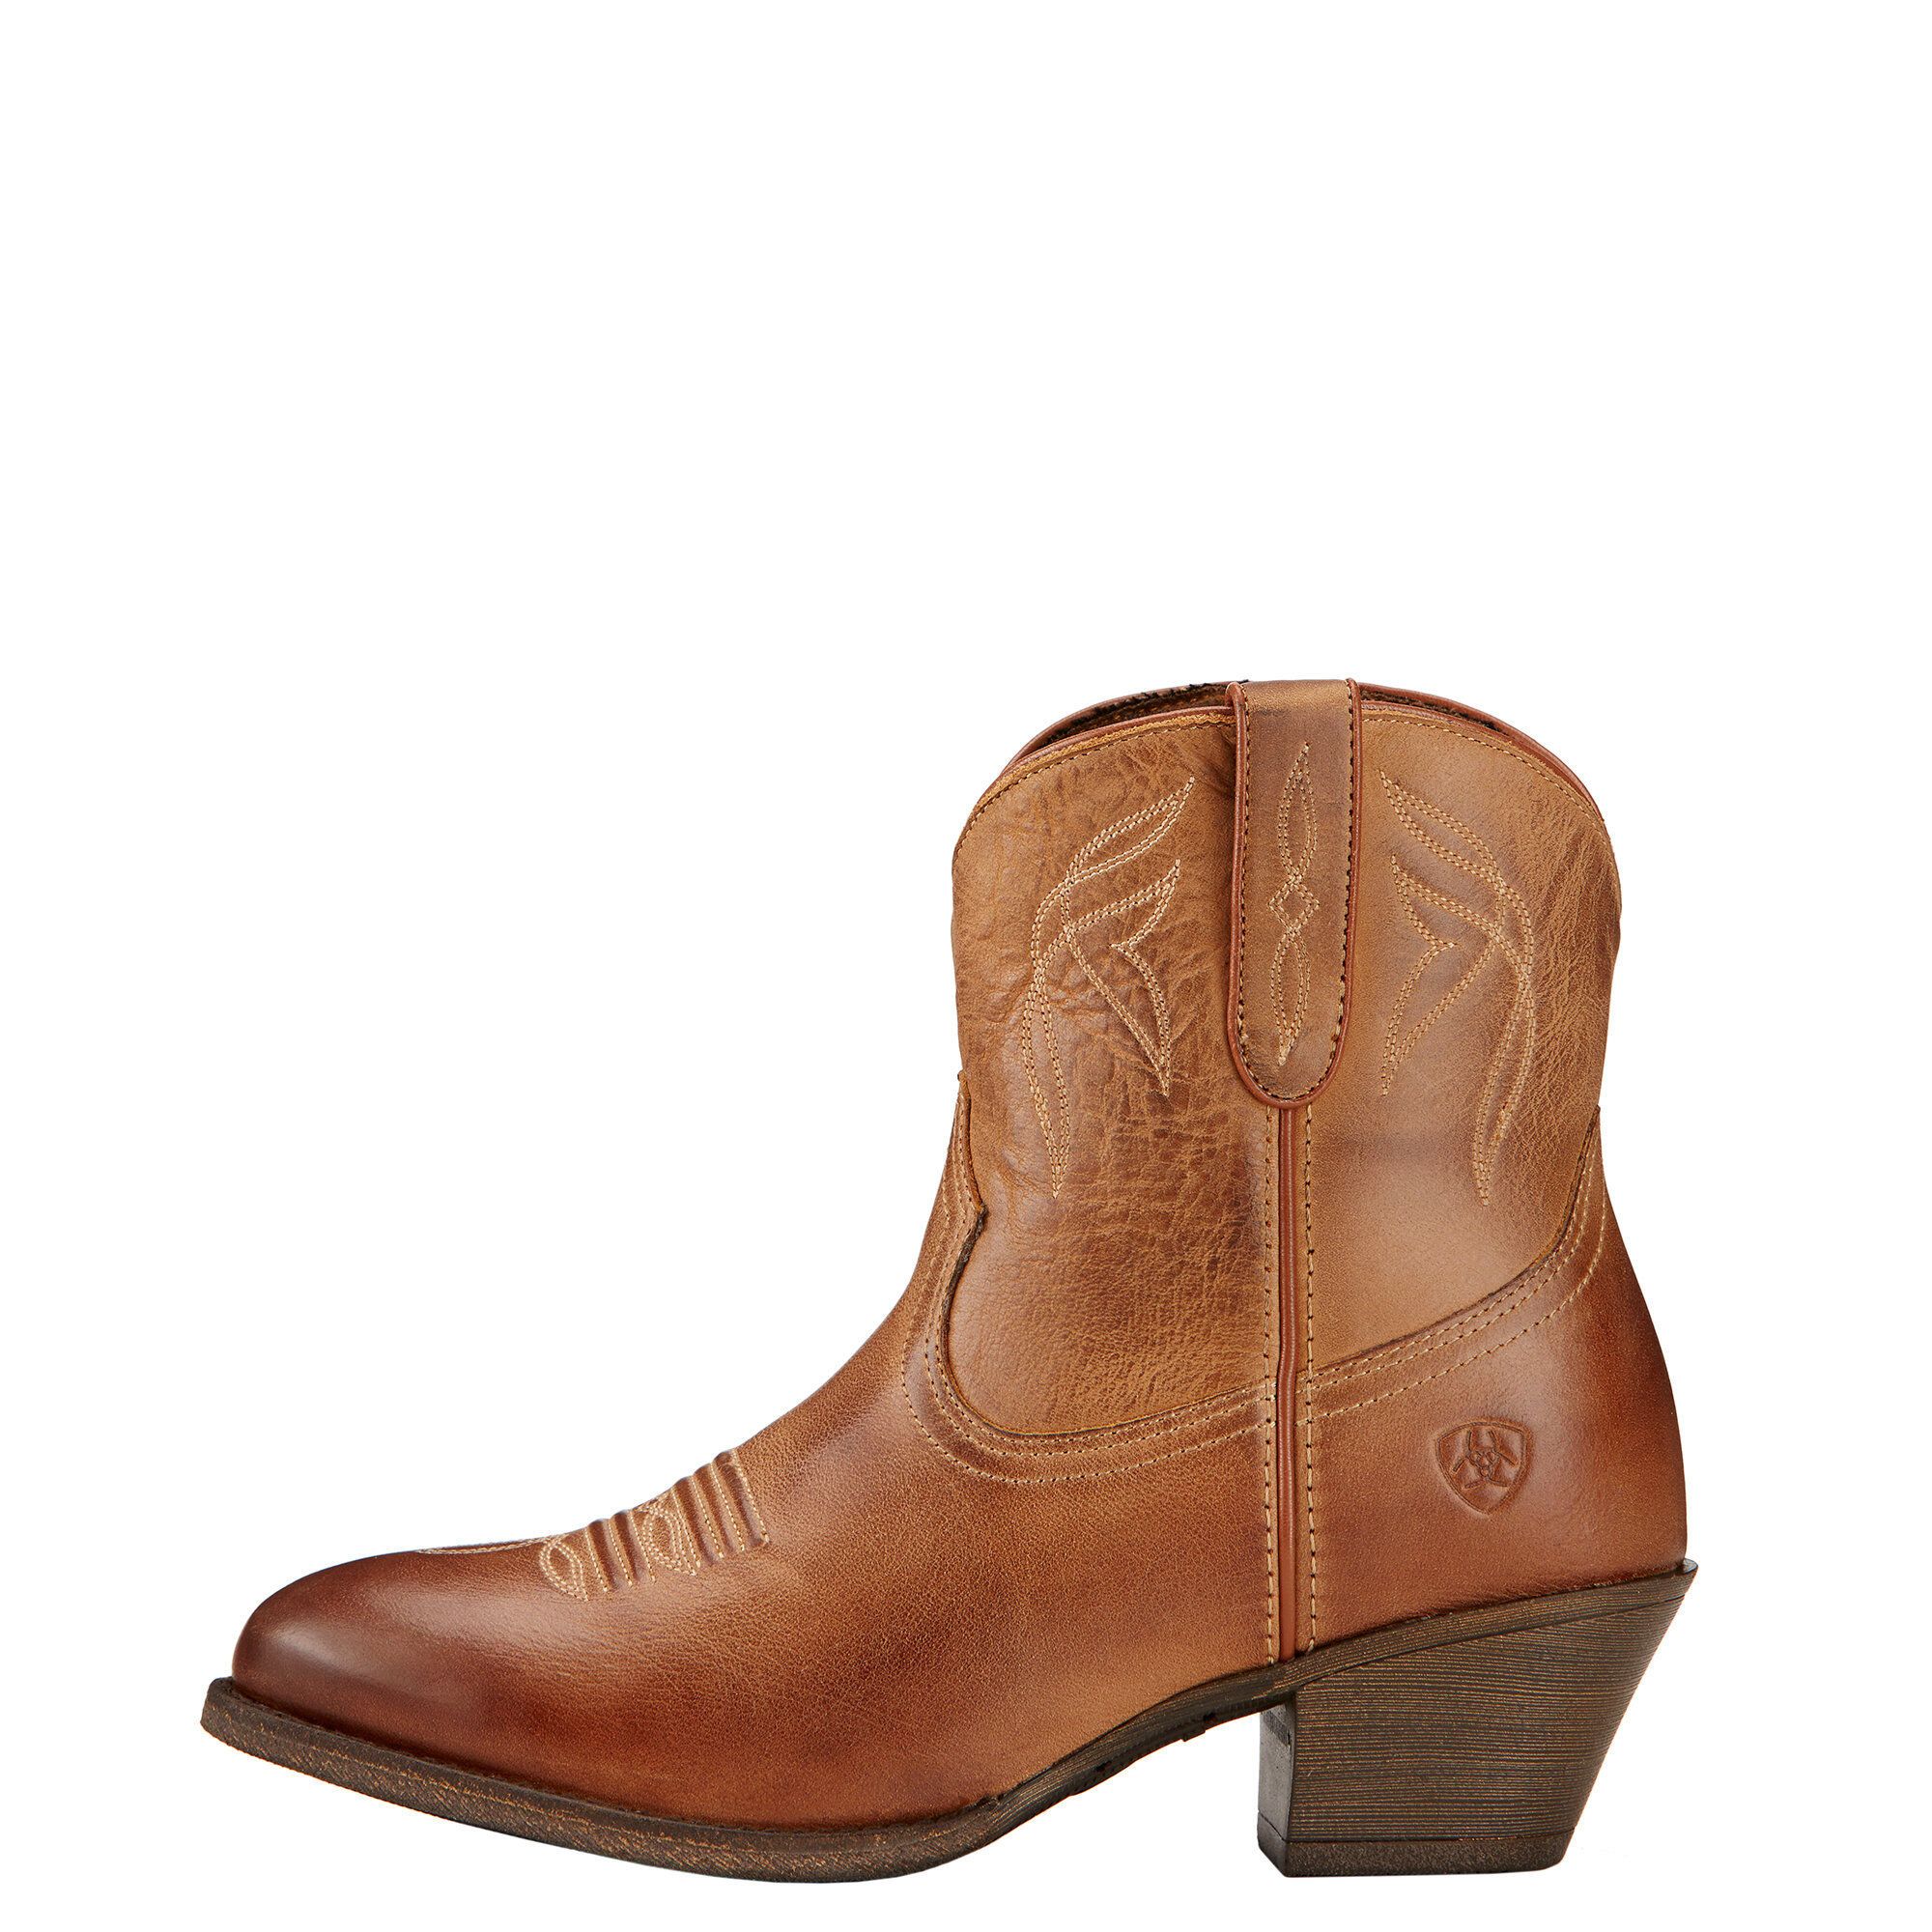 Ariat Darlin Western Boot Women’s Leather Country Boots 